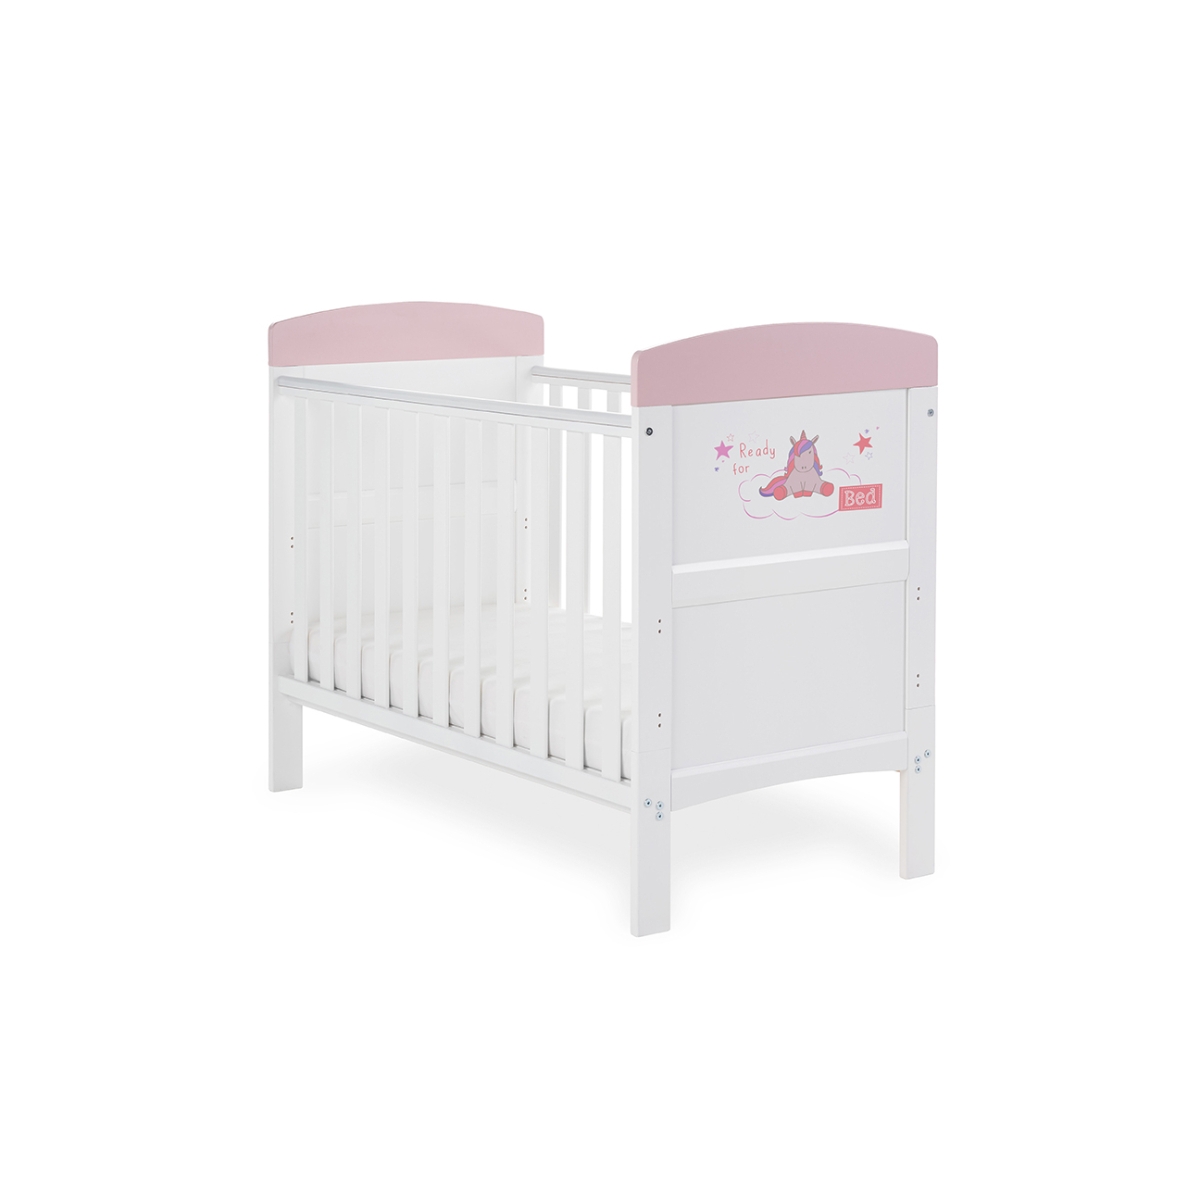 Obaby Grace Inspire Mini Cot Bed